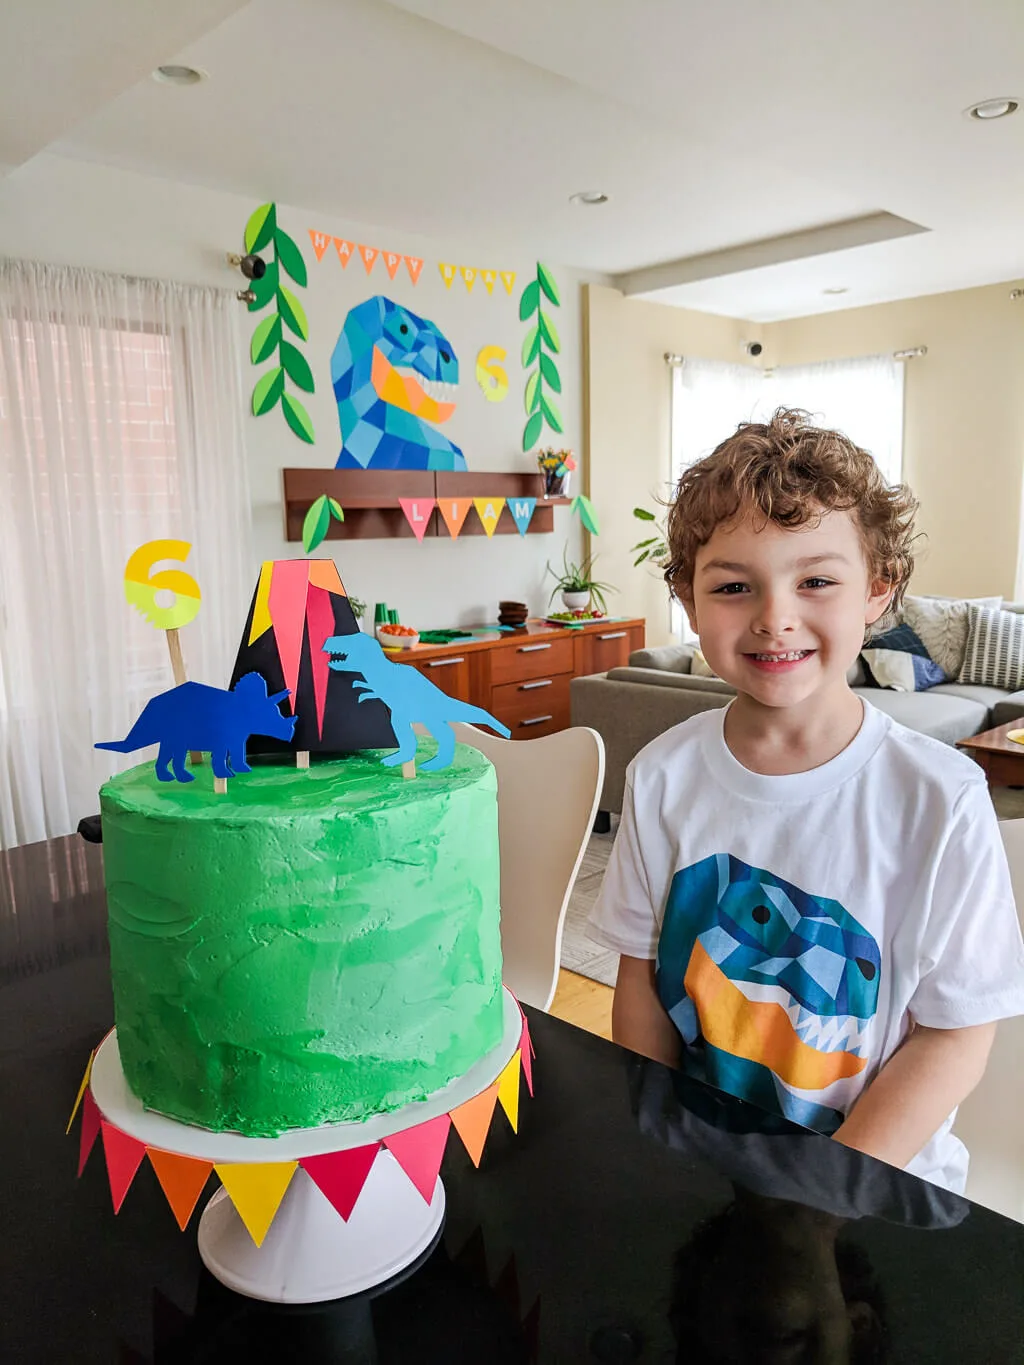 Liam with dinosaur birthday cake. Copyright Merriment Design Co. Do not use photo without written permission.